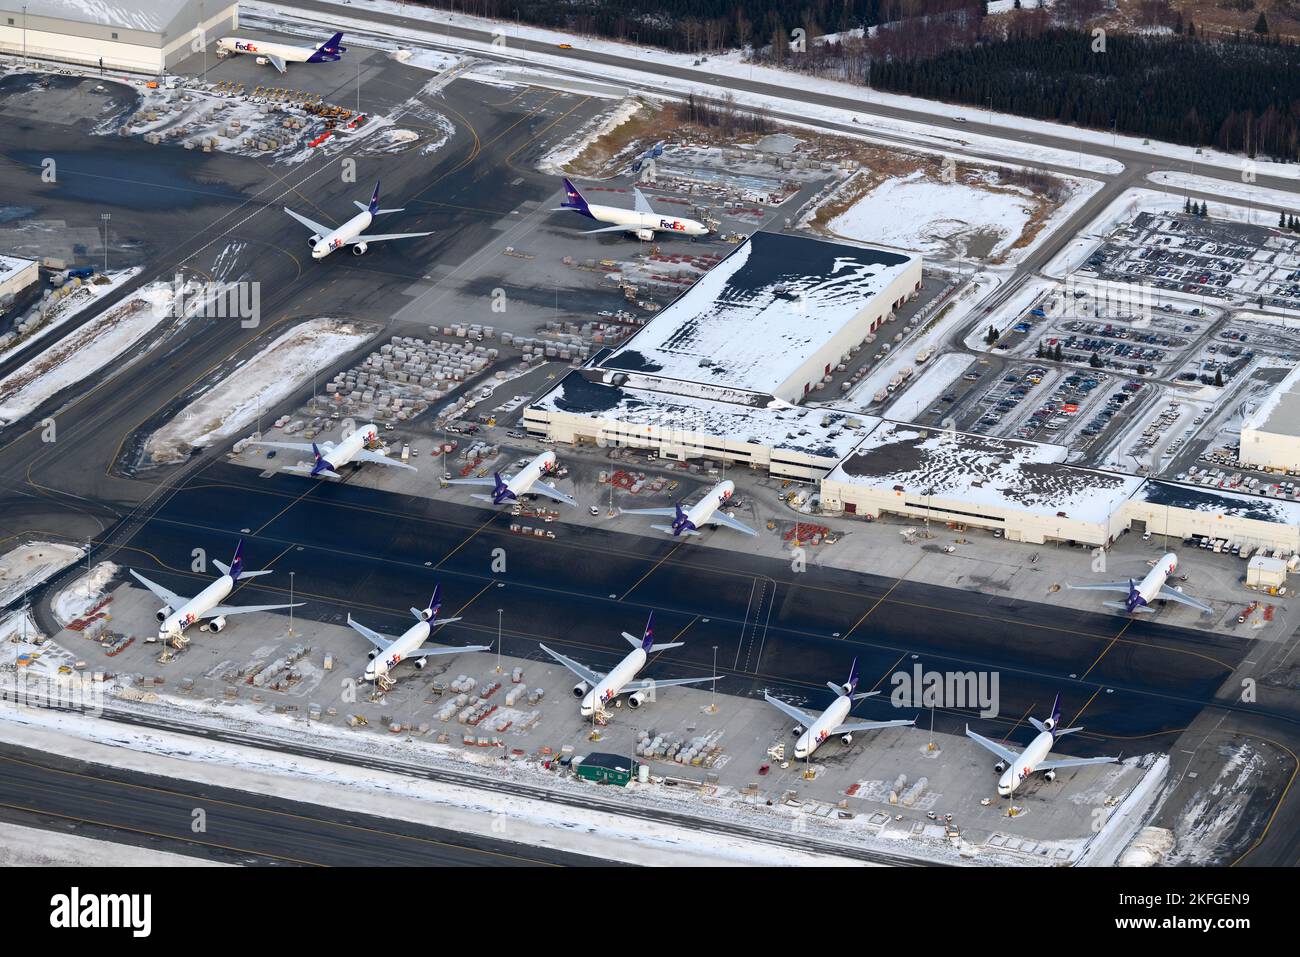 FedEx Cargo airline ramp at Anchorage Airport, a hub for aircraft cargo transportation in Alaska. Federal Express airplanes at it's freight hub. Stock Photo